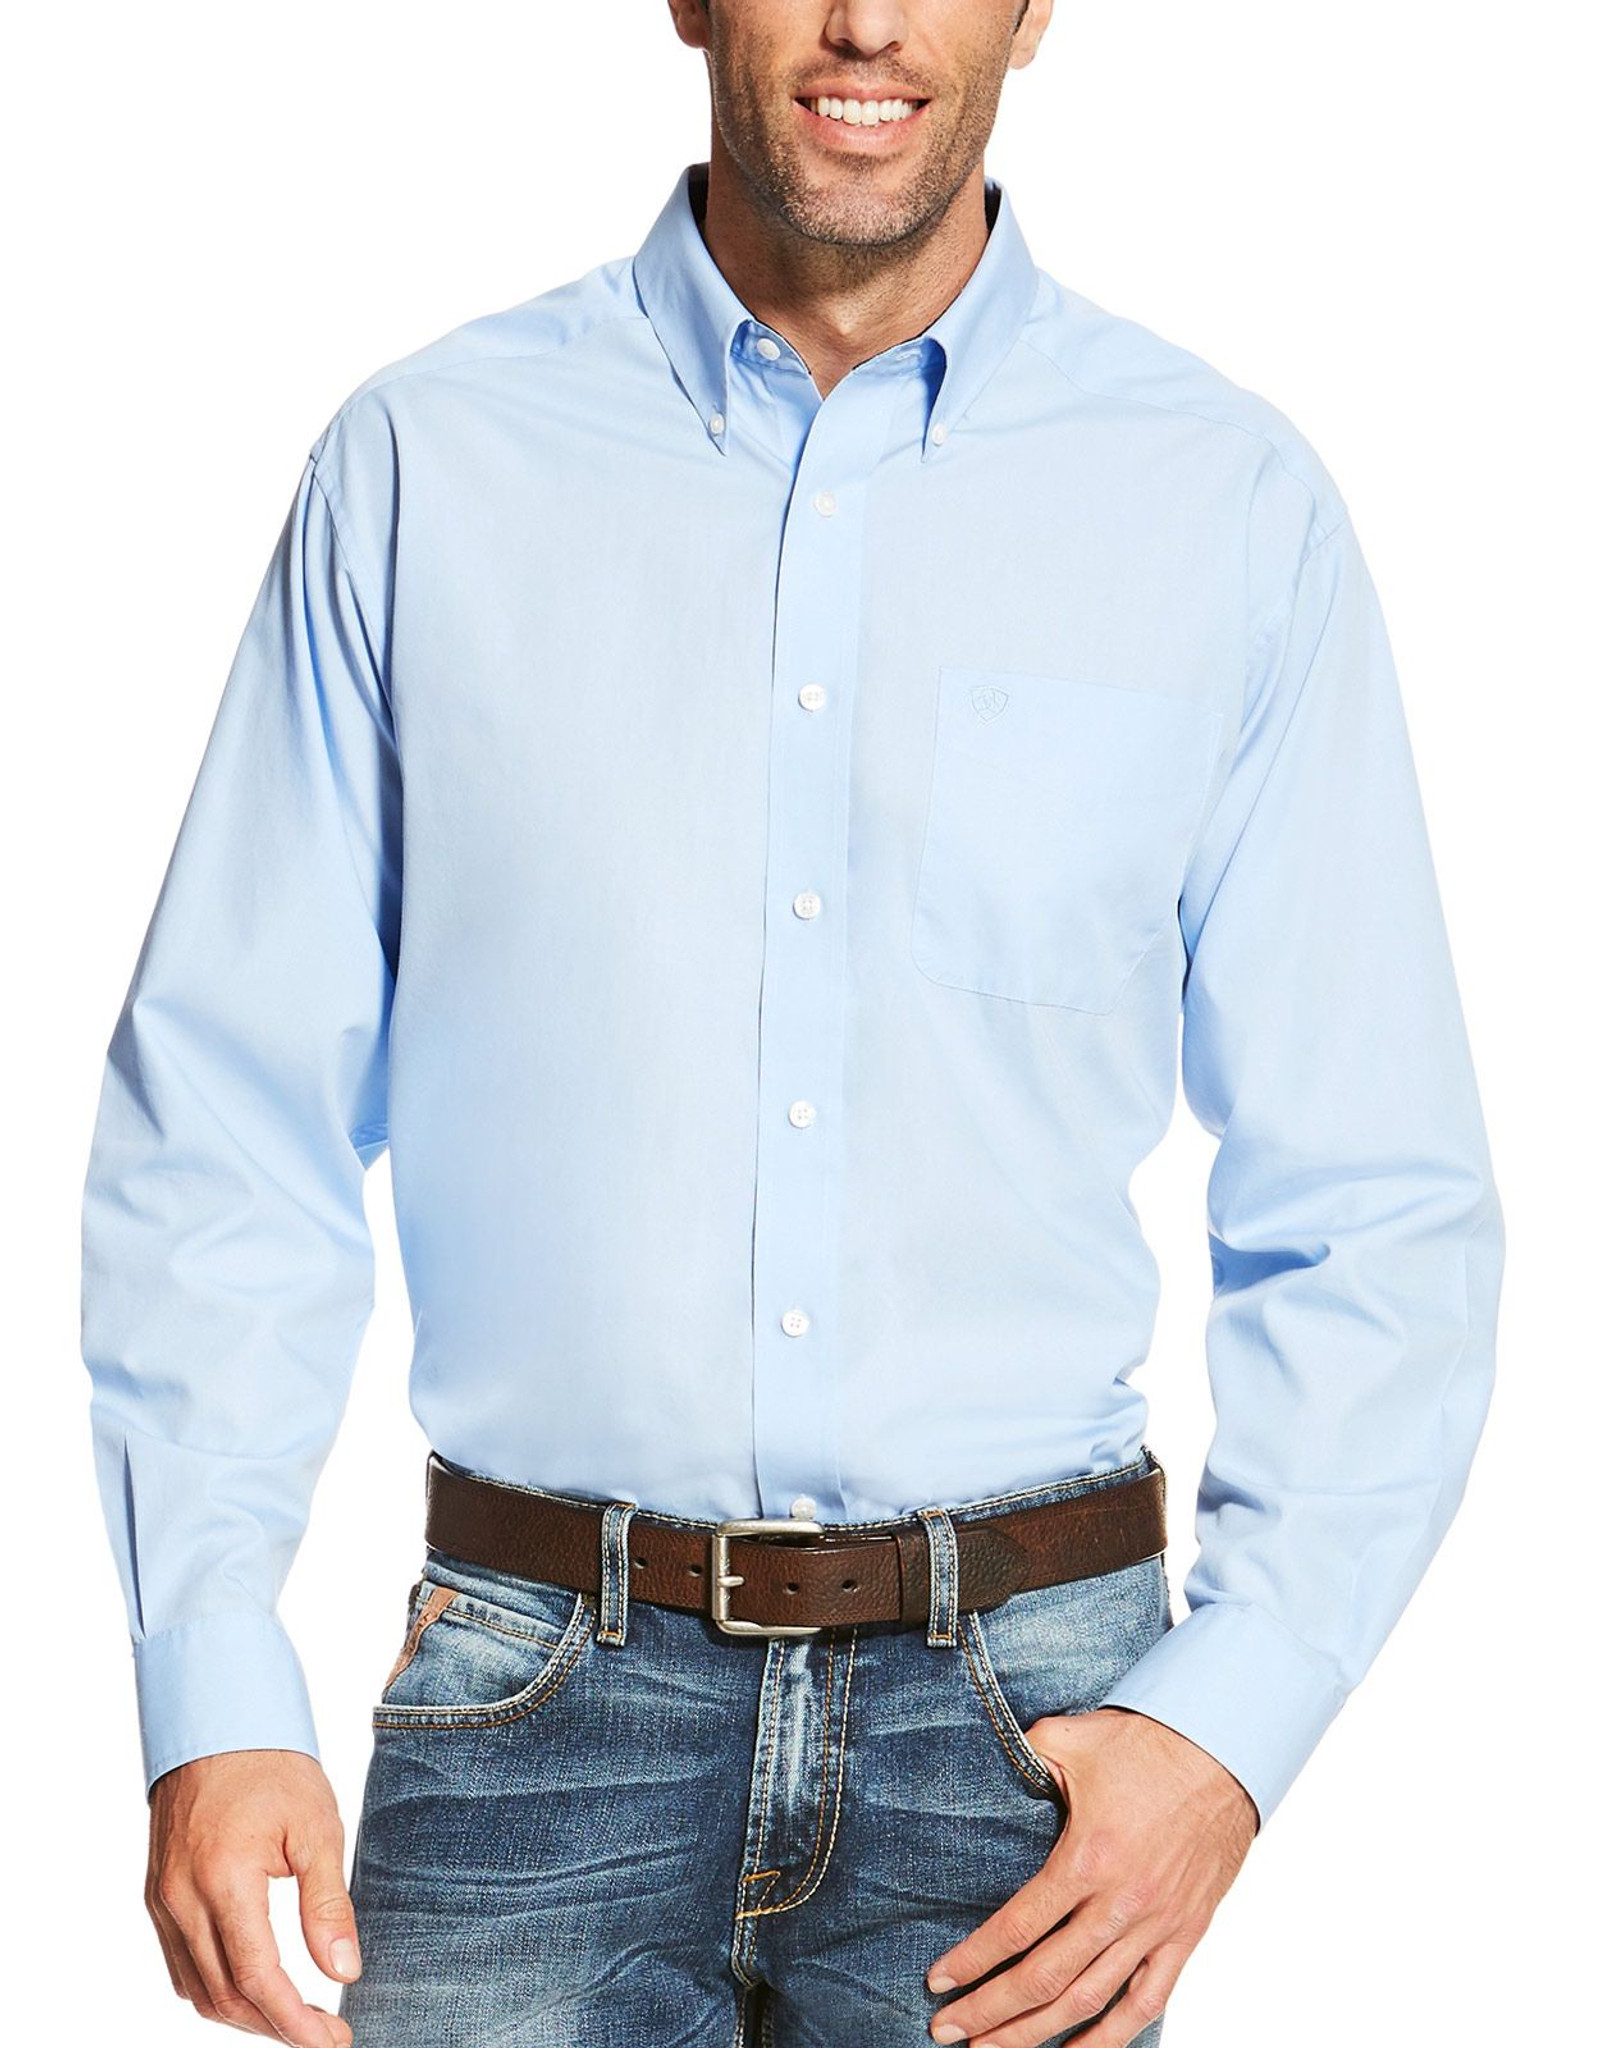 Ariat Men's Wrinkle Free Long Sleeve Solid Button Down Shirt - Light Blue